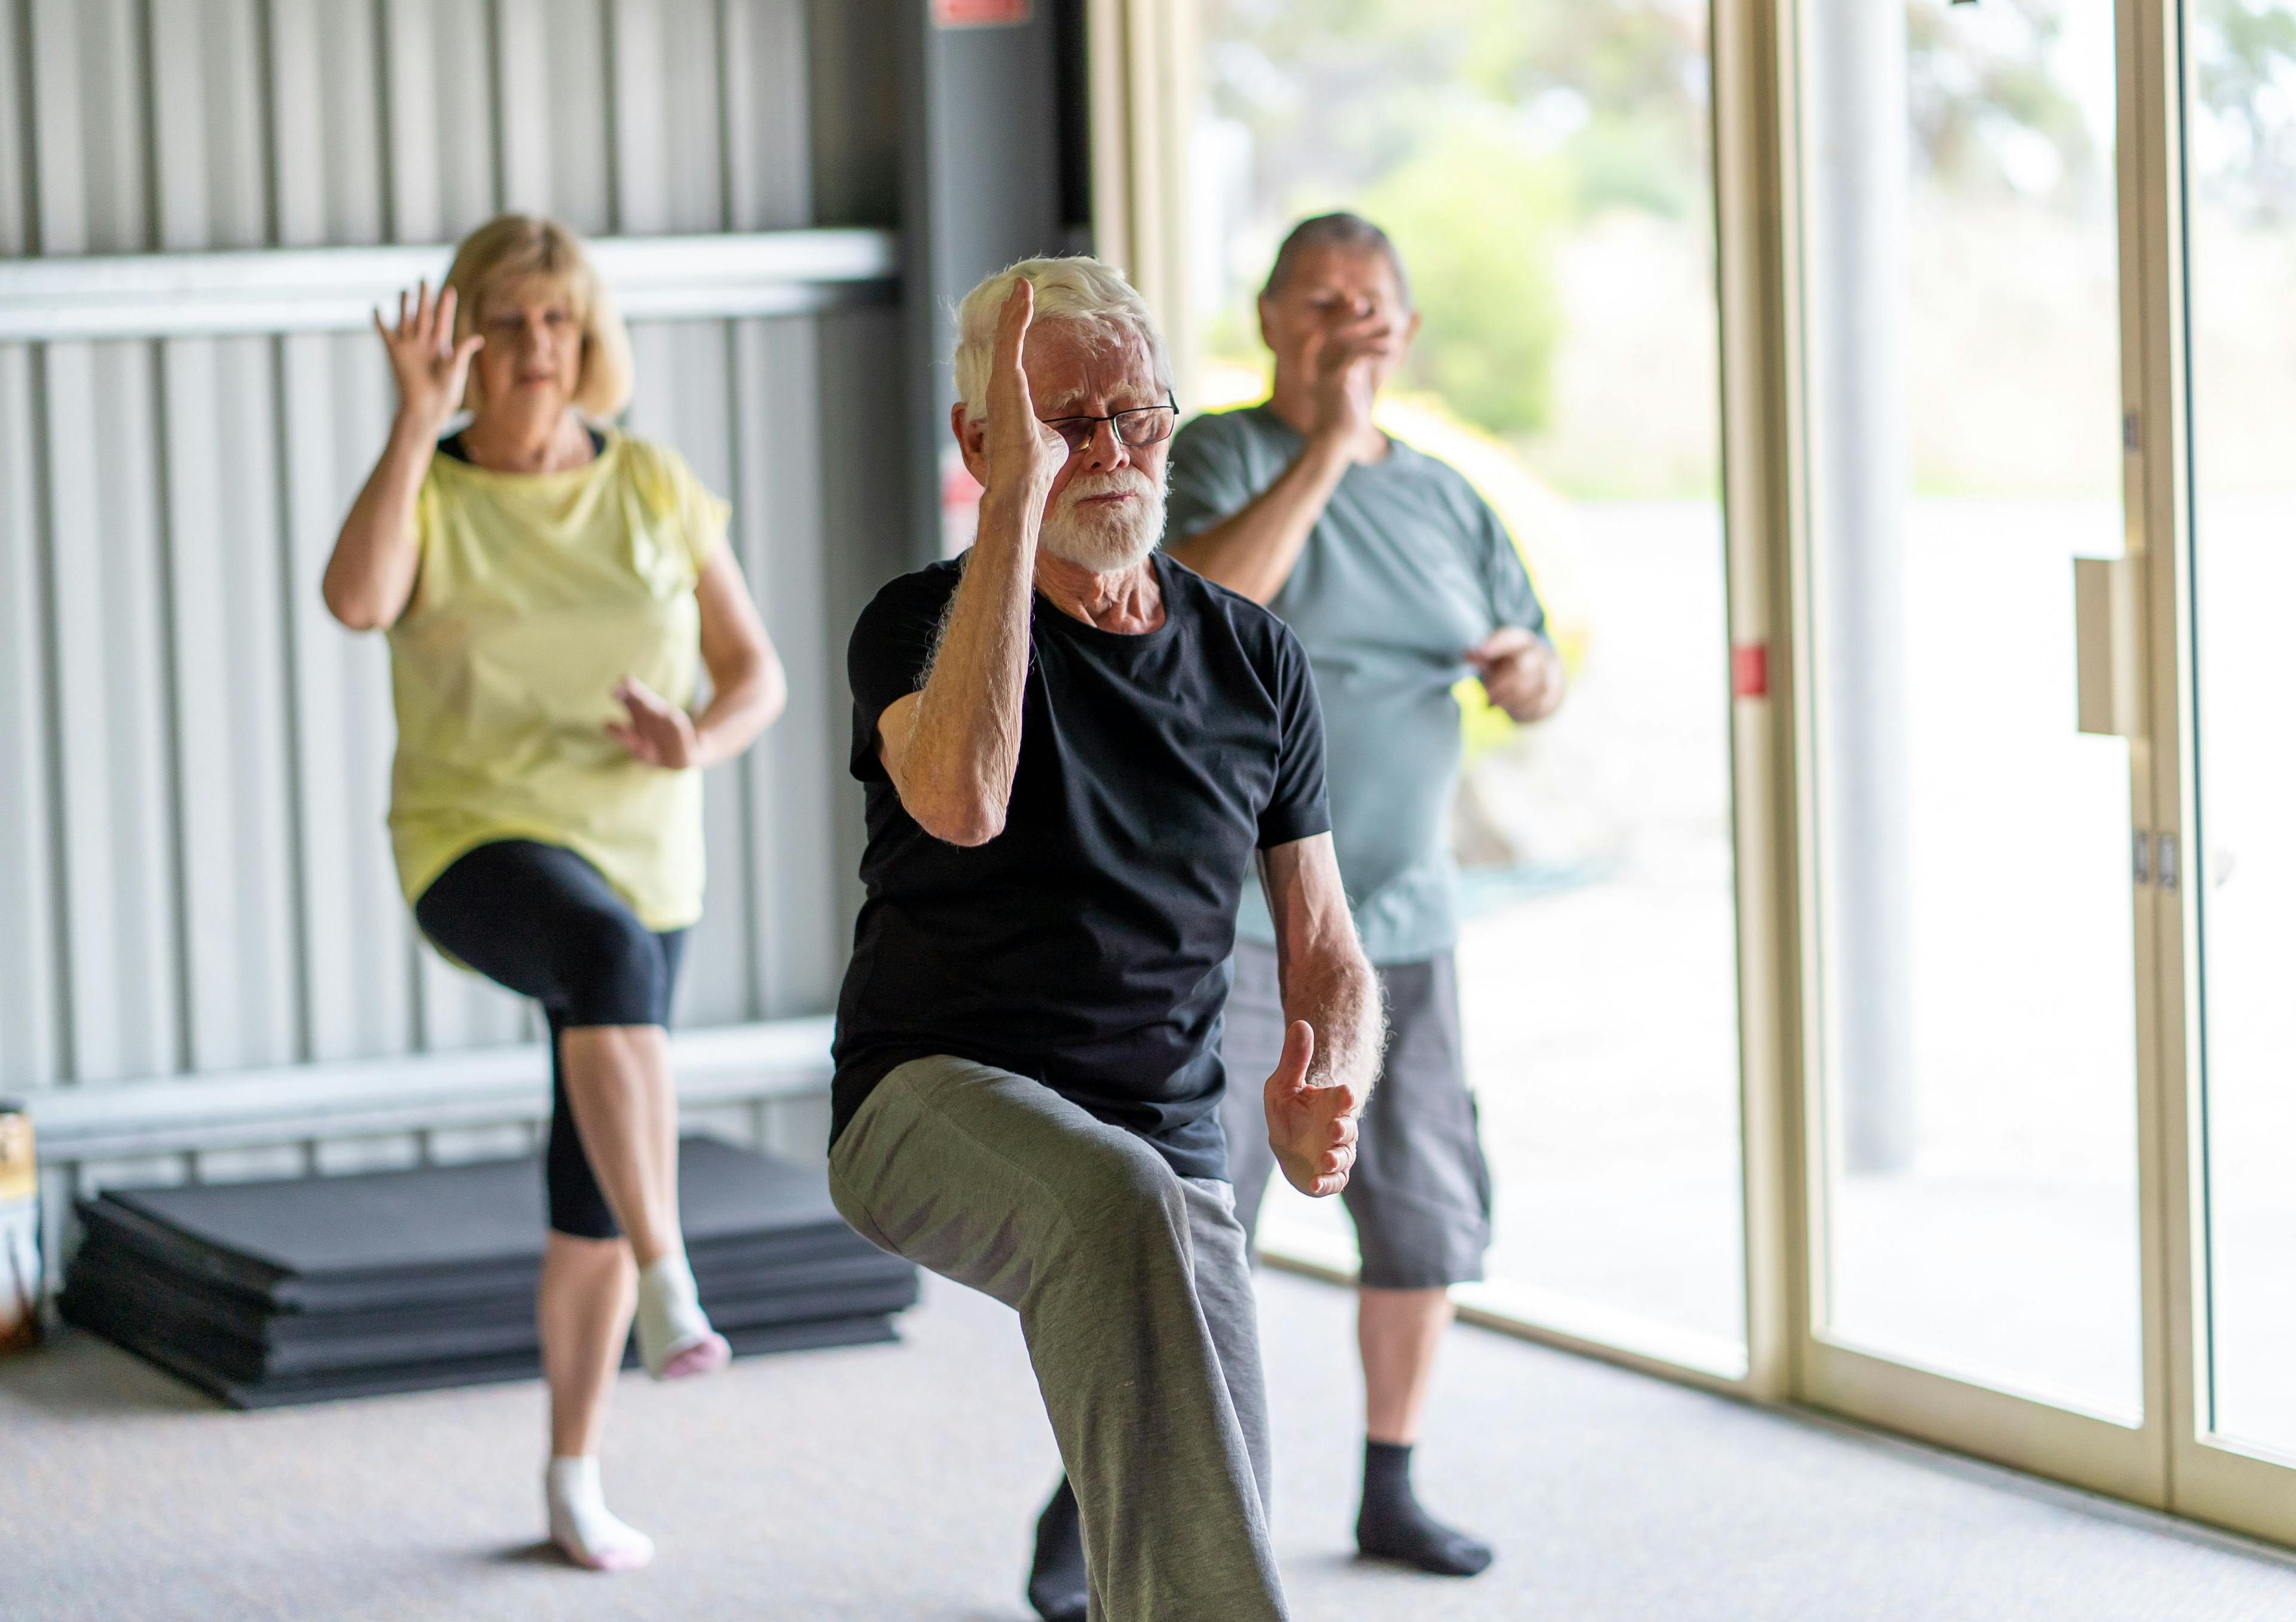 Group of elderly senior people practicing Tai chi class in age care gym facilities | Image credit: SB Arts Media - stock.adobe.com